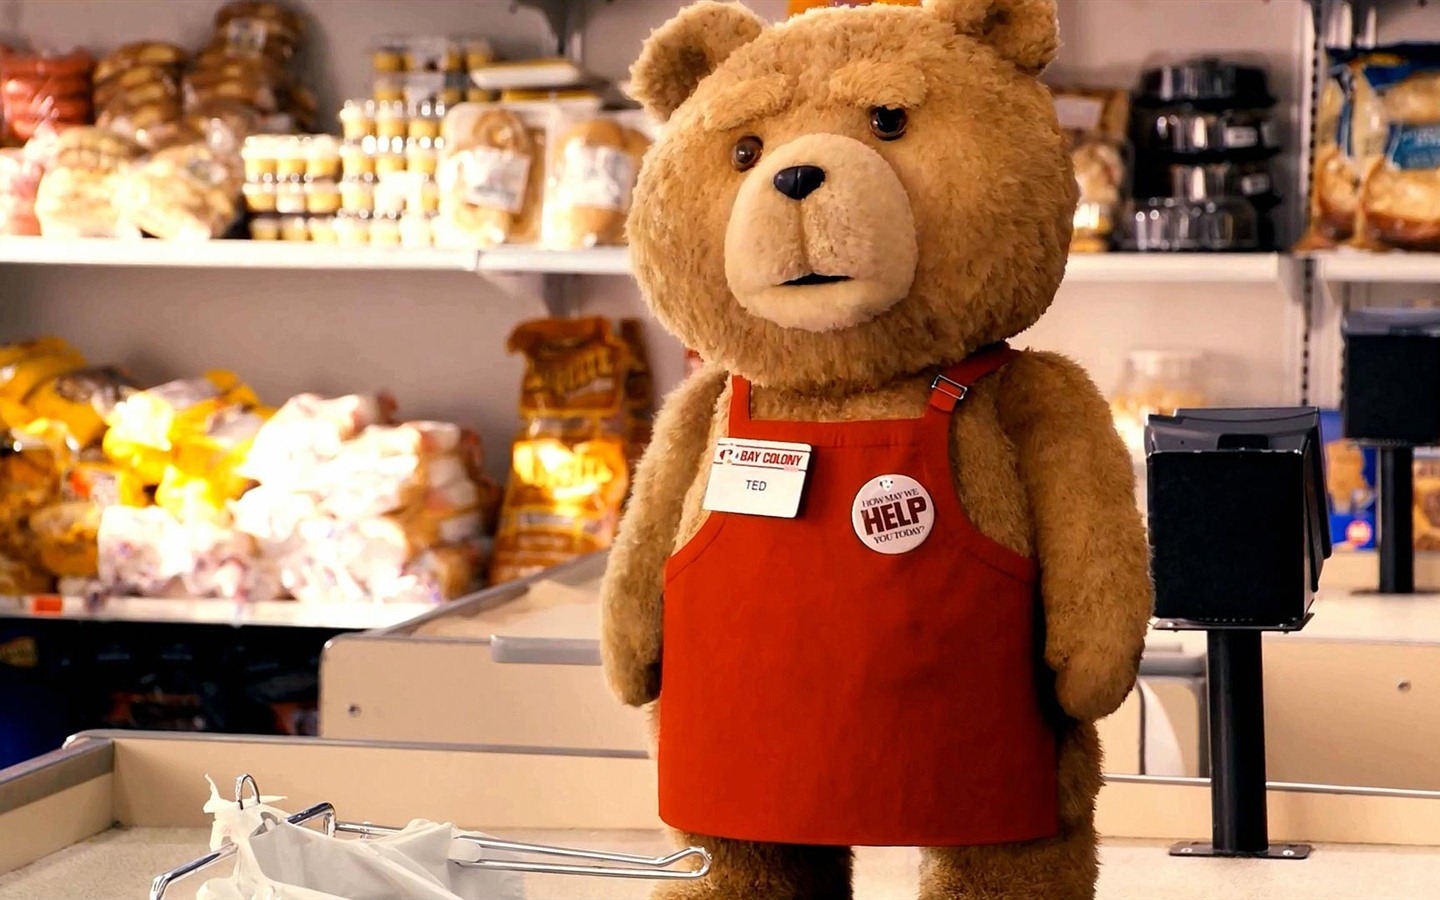 Ted 2012 HD movie wallpapers #14 - 1440x900